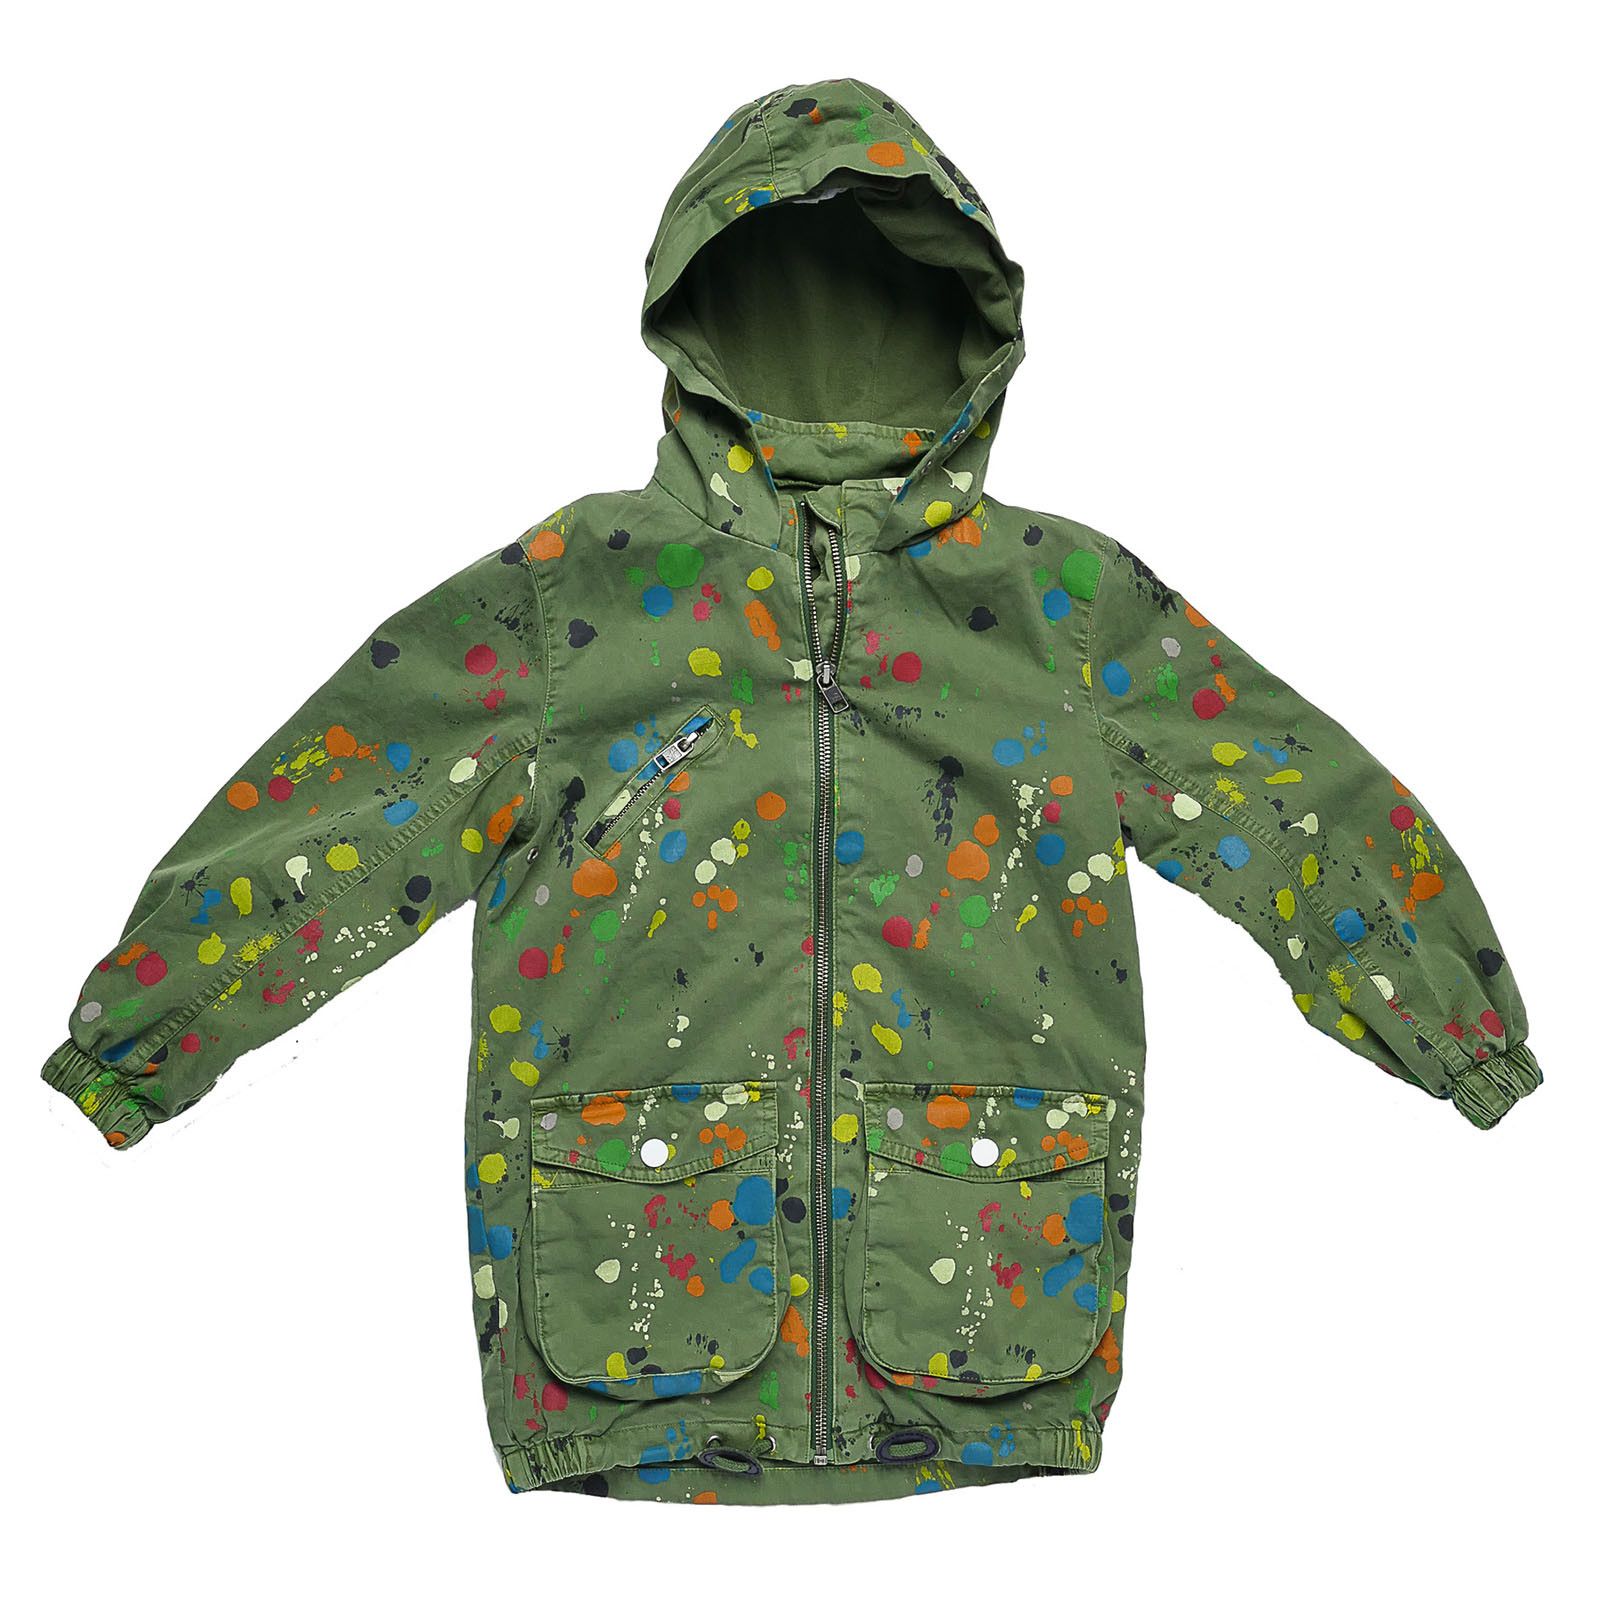 Boys Green Cotton Hooded Outerwear Zip-up Tops With Spot Print Trims - CÉMAROSE | Children's Fashion Store